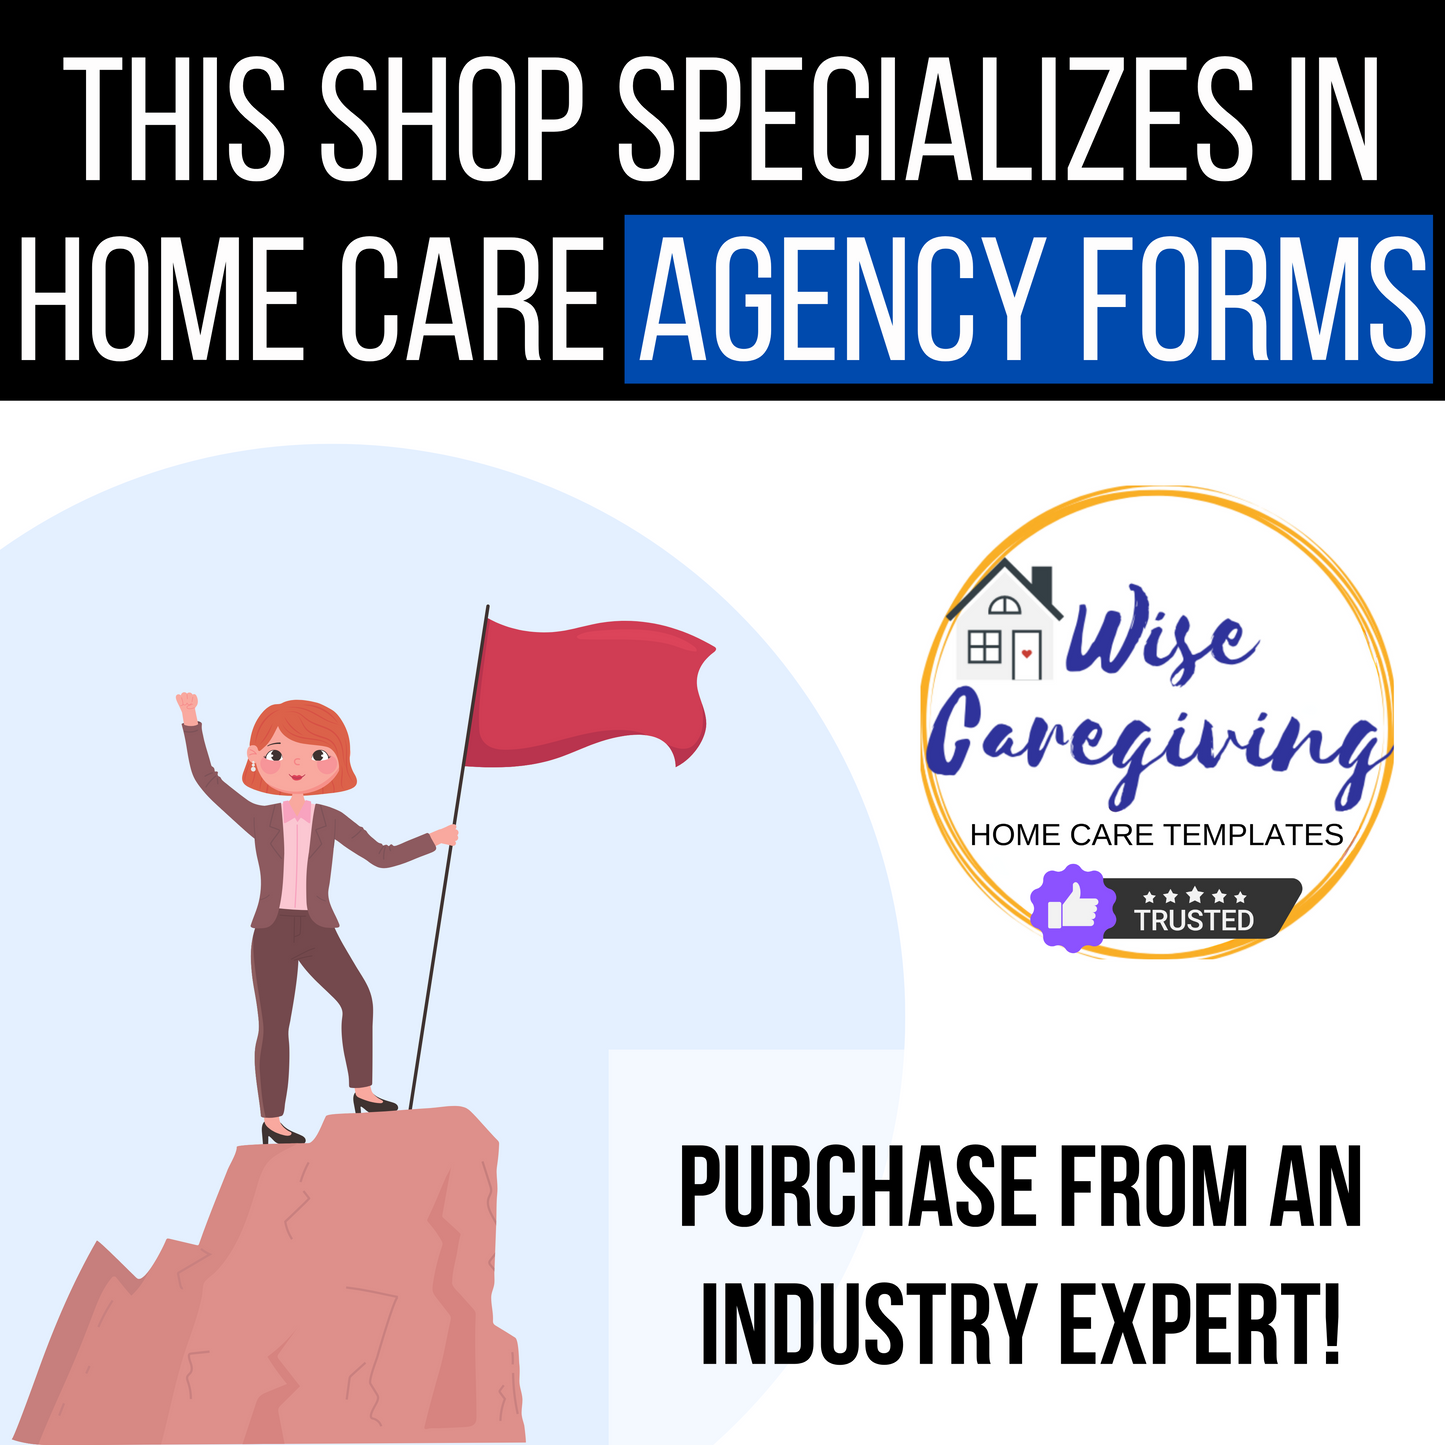 Home Care Business Call Record Template